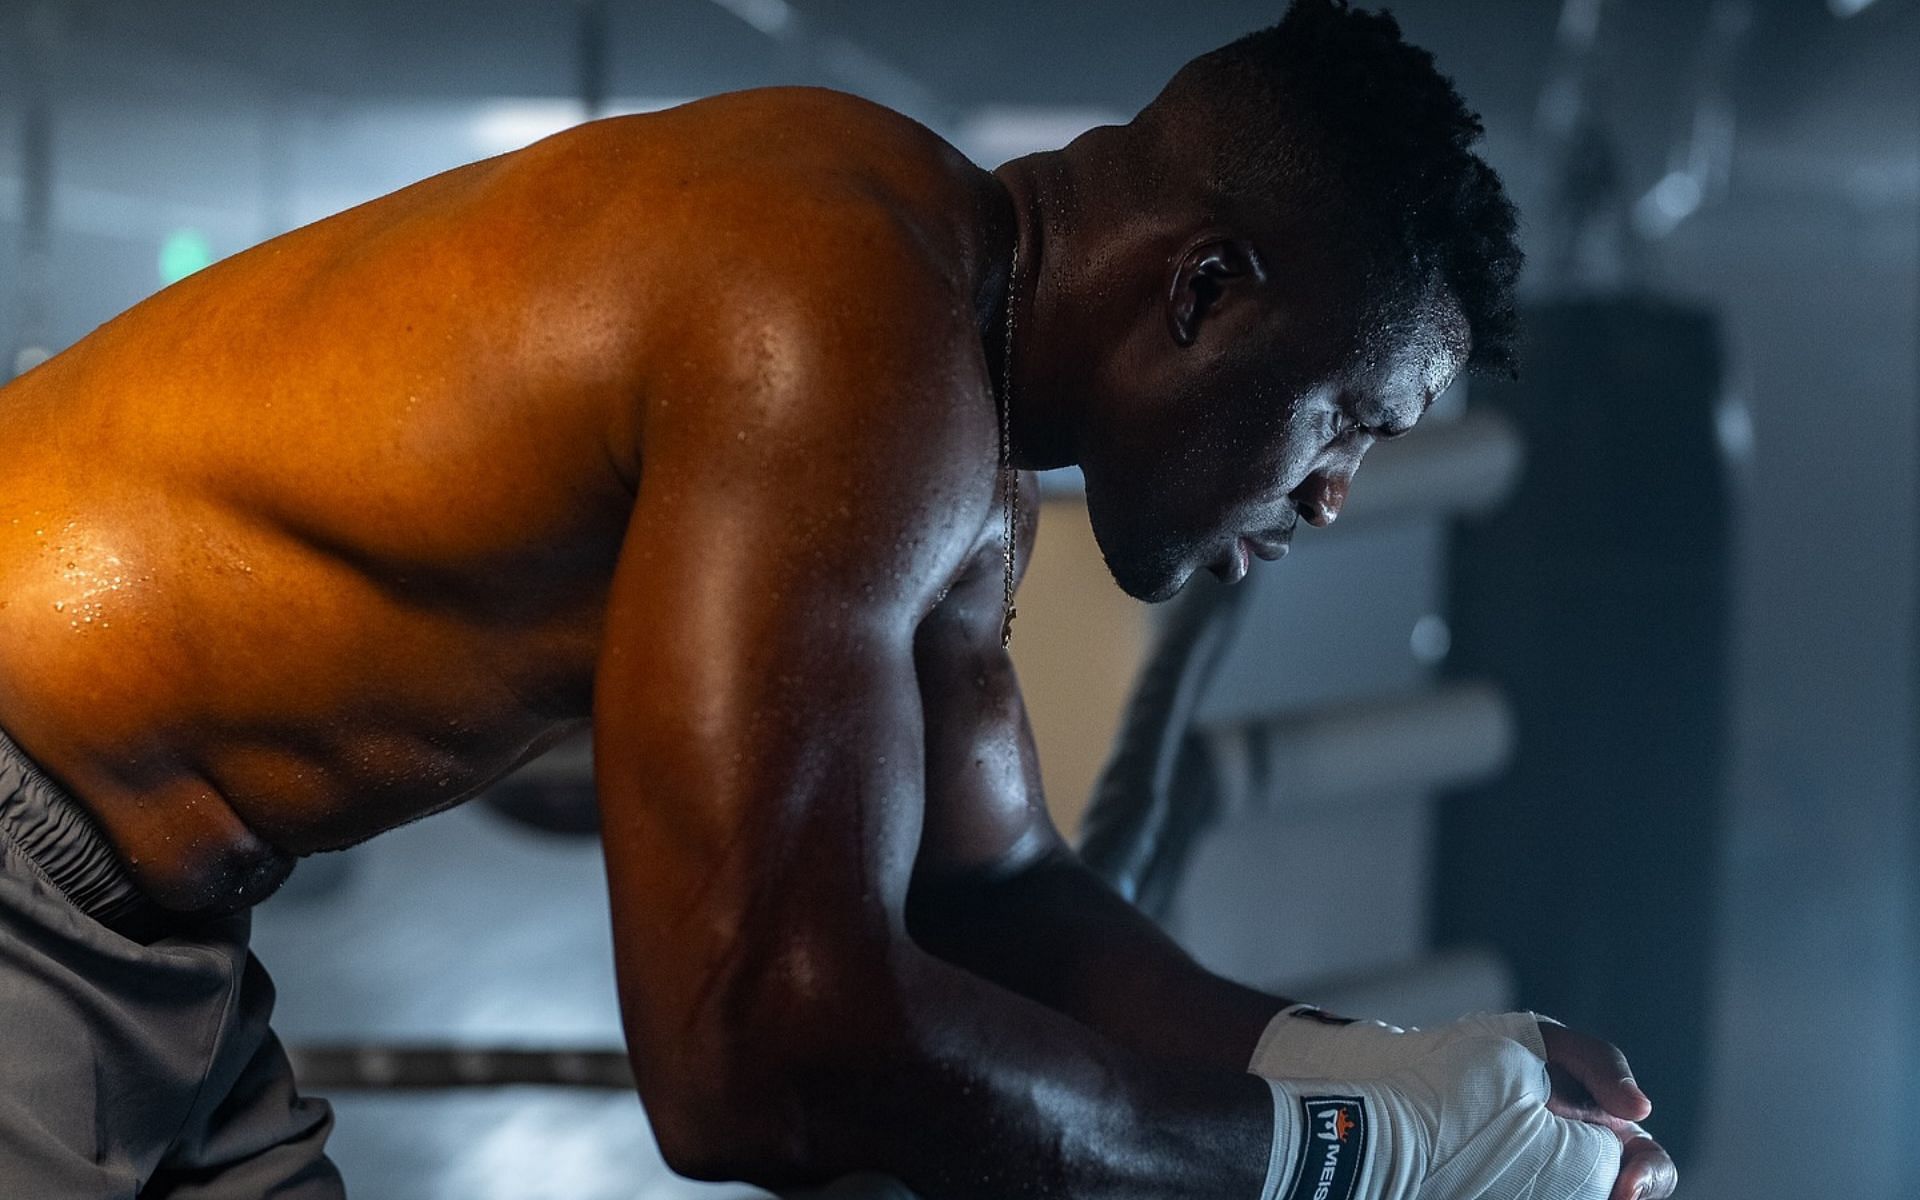 Francis Ngannou (pictured) responds to doubters ehad of Anthony Joshua fight [Image Courtesy: @francis_ngannou on Instagram]